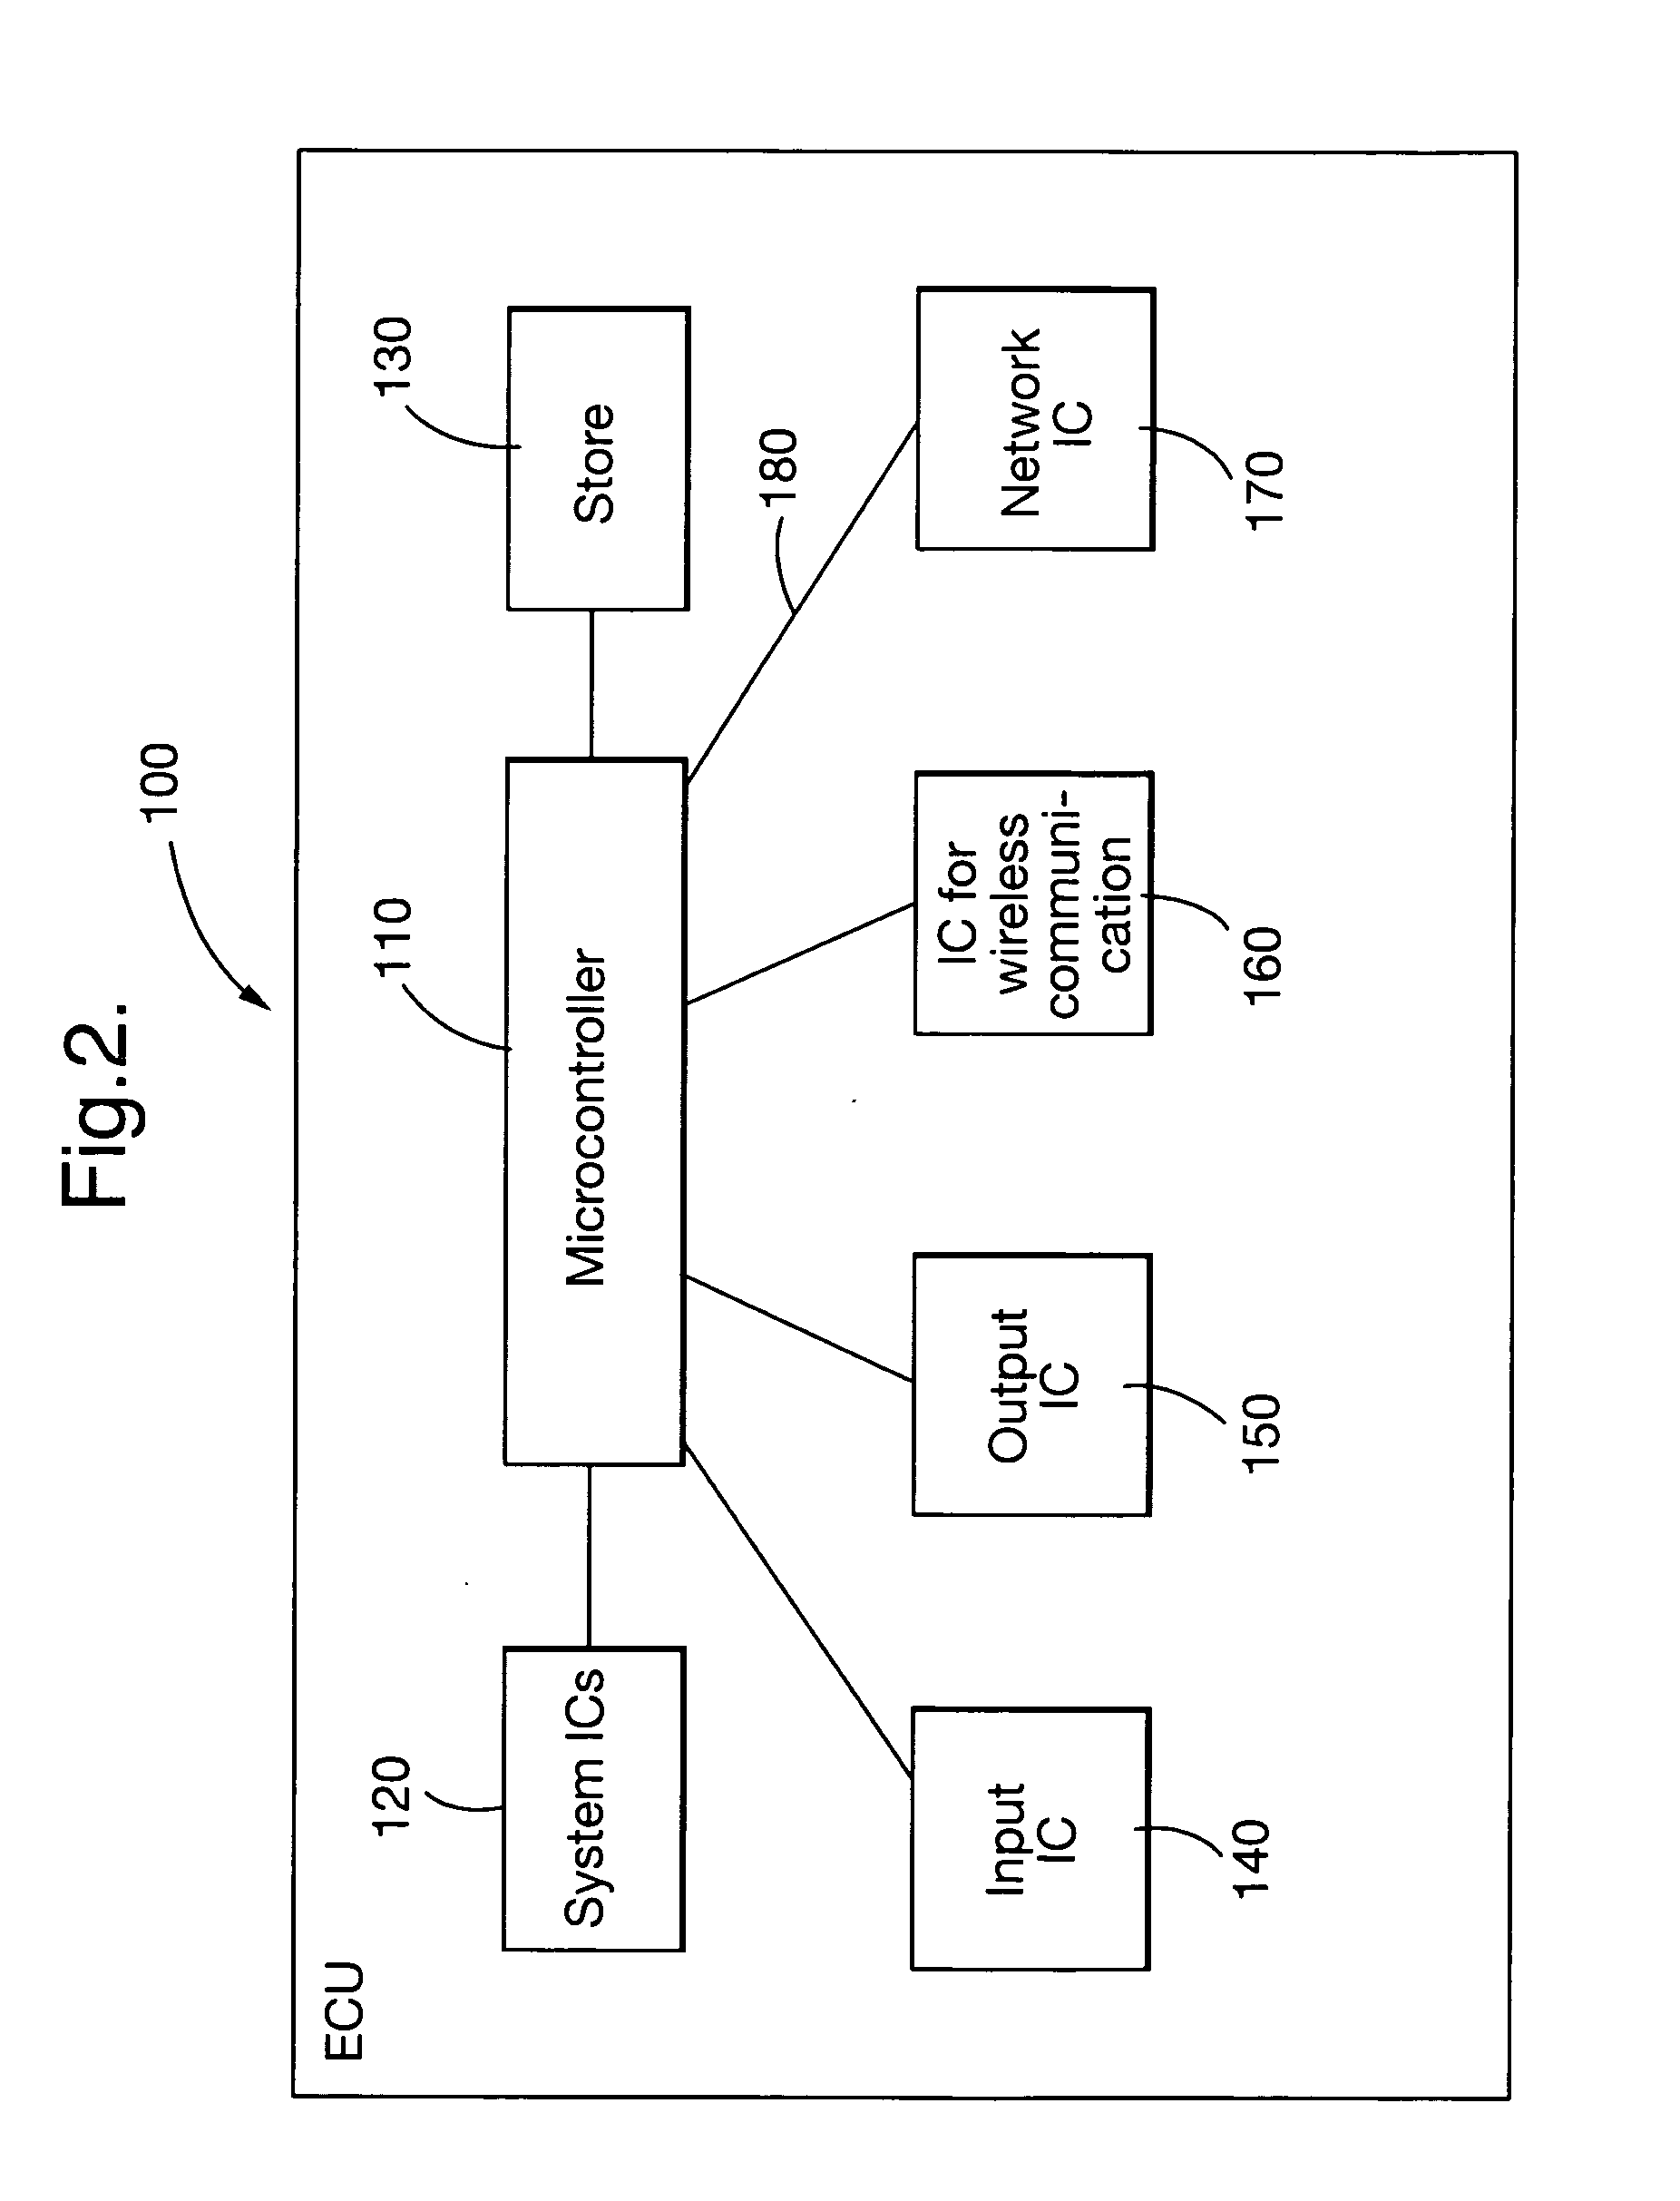 Method for the integration of an integrated circuit into a standardized software architecture for embedded systems